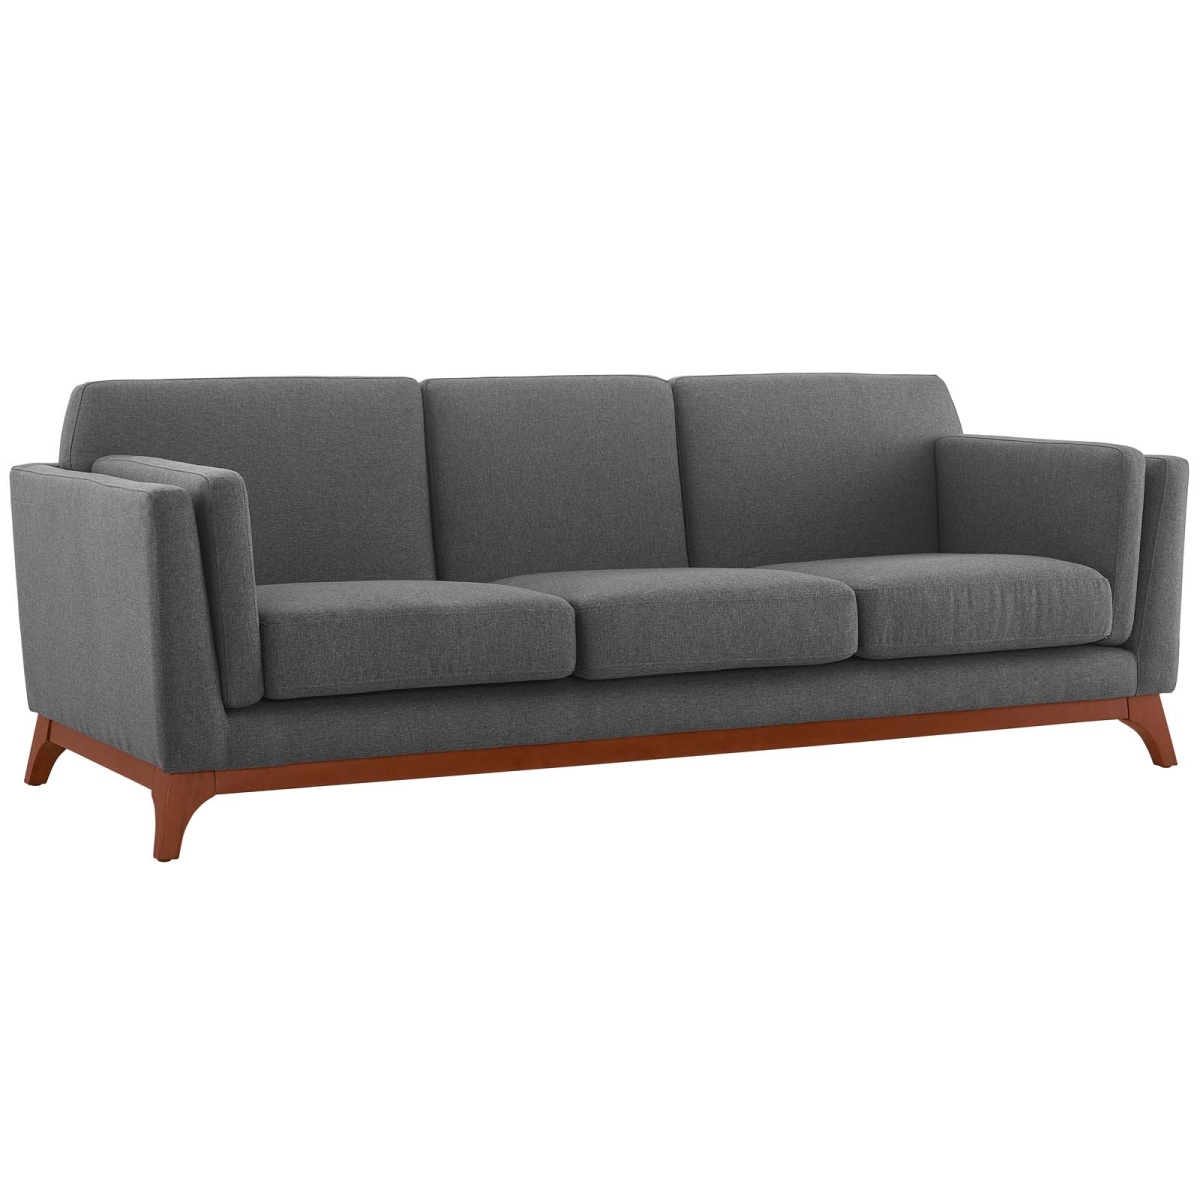 Eei-3062-gry Chance Upholstered Fabric Sofa - Gray, 30 X 35 X 83.5 In.